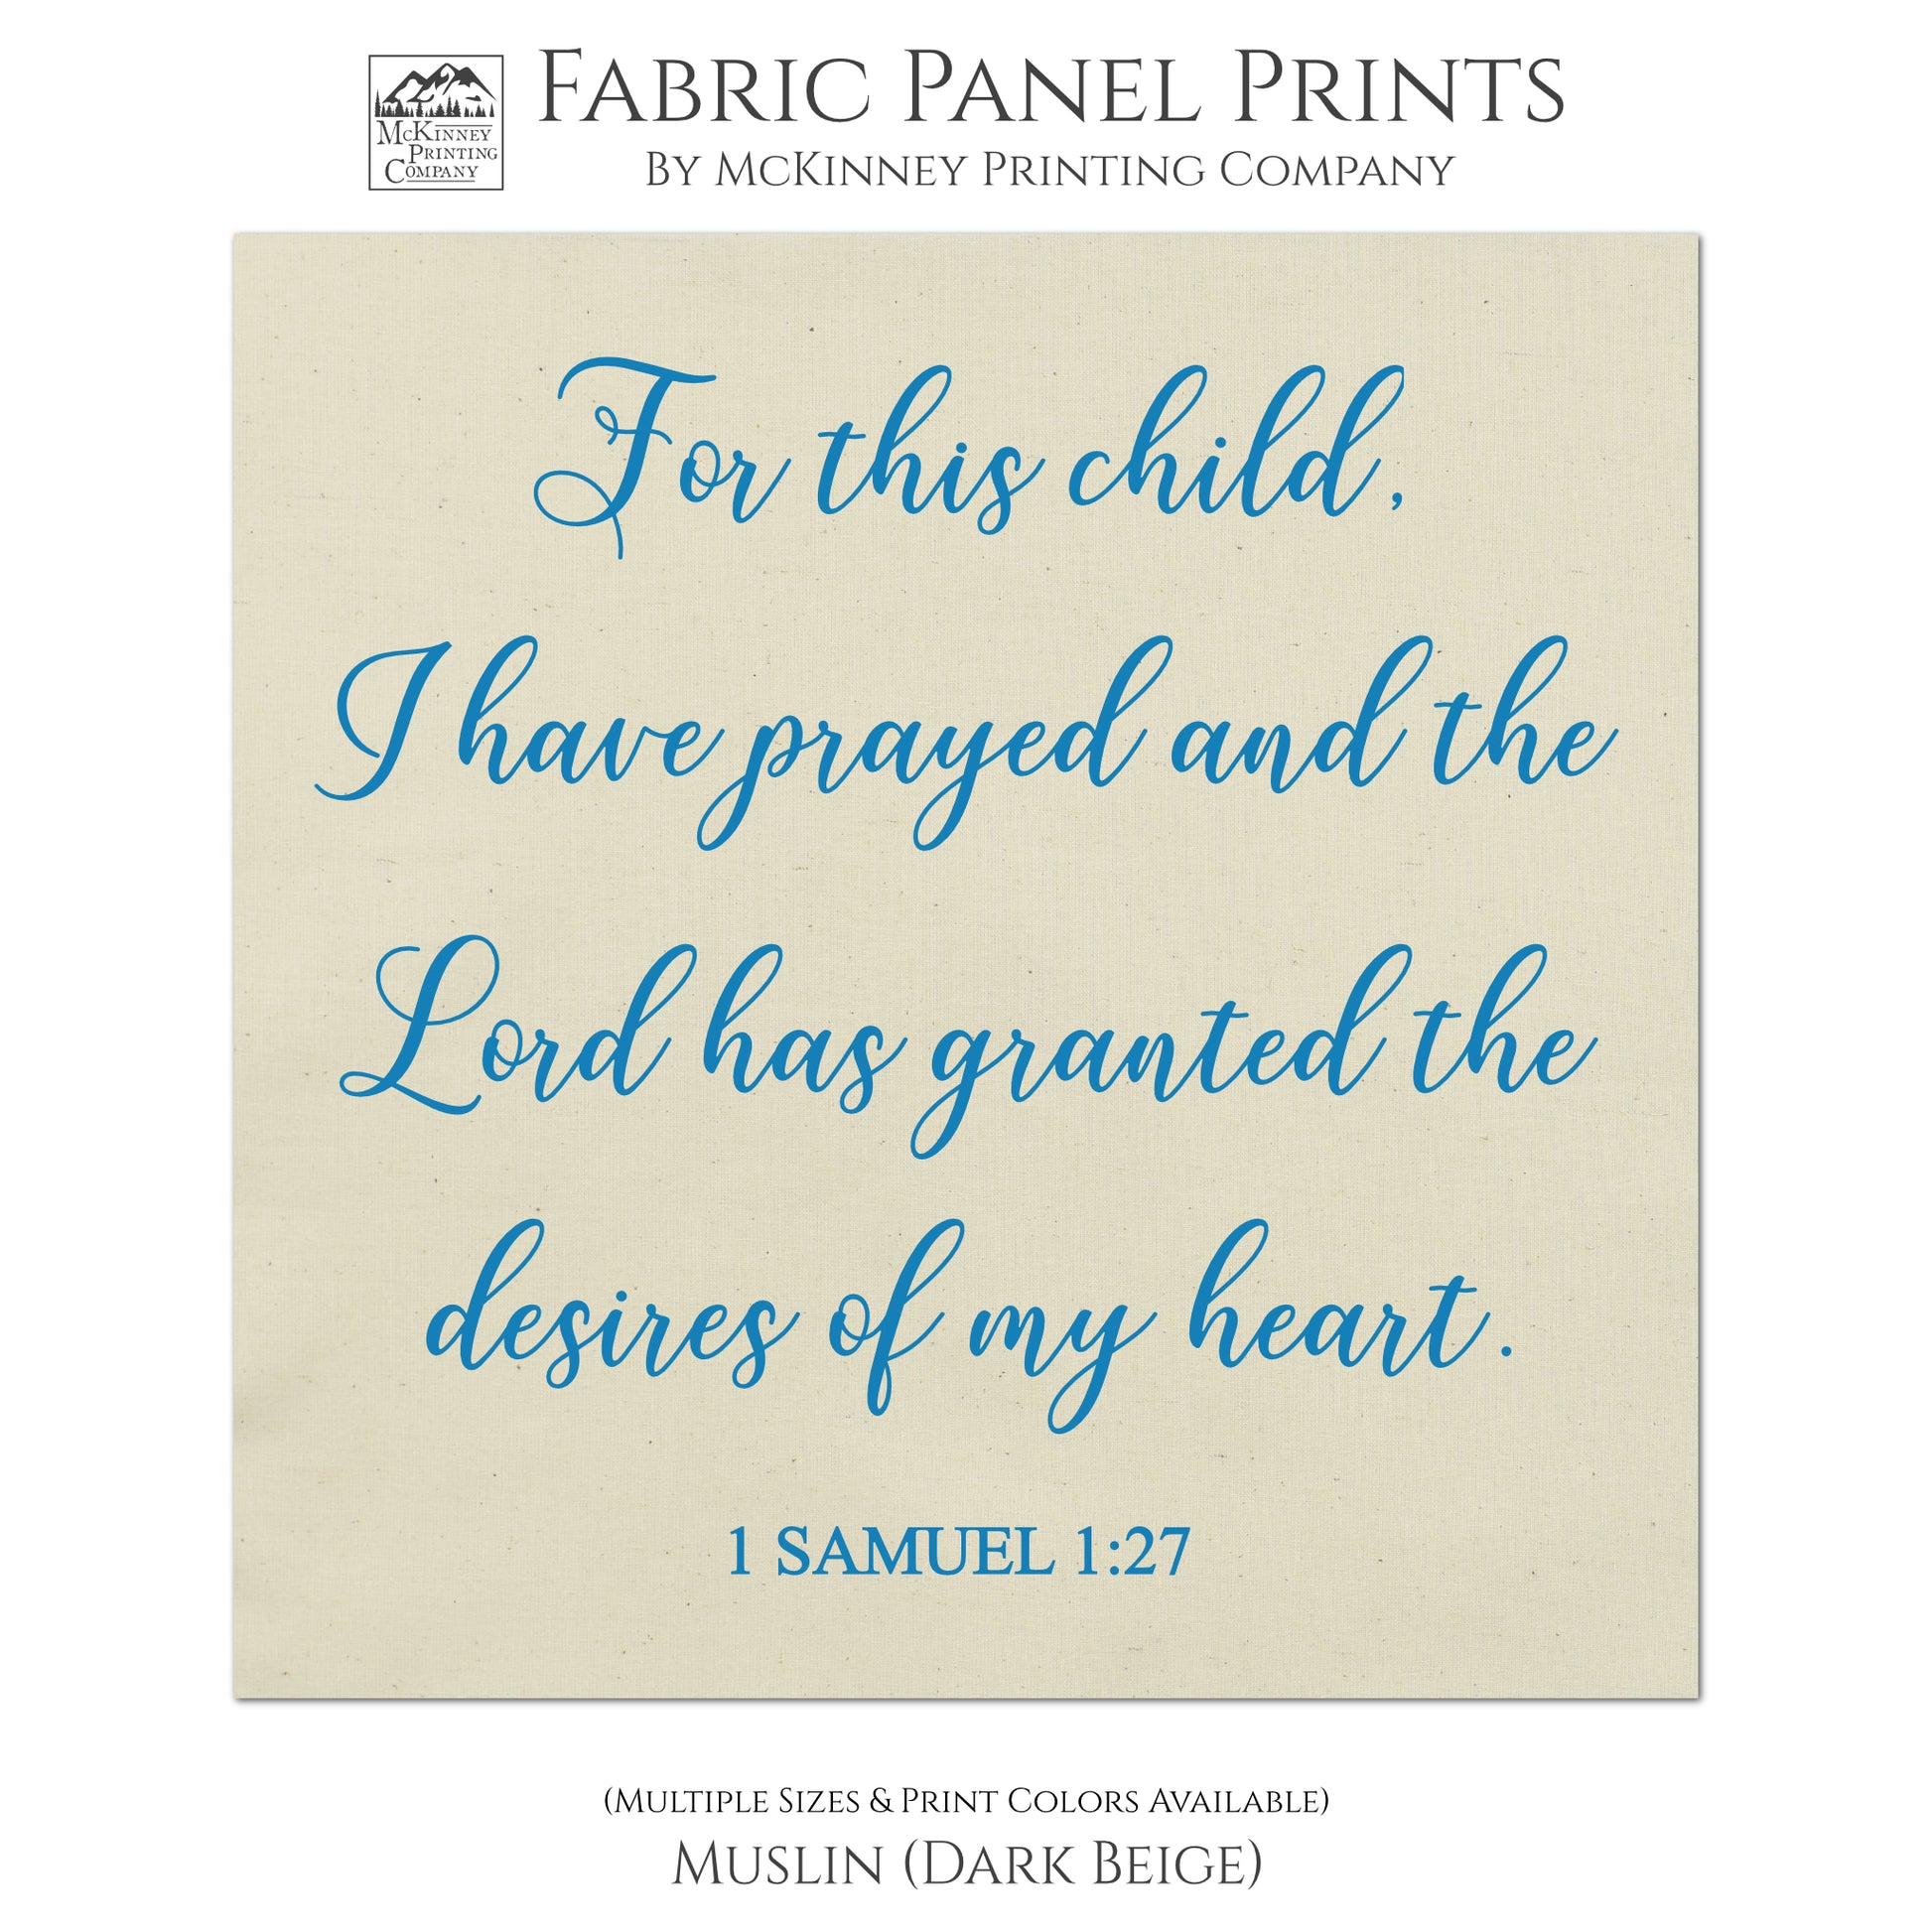 For This Child I Have Prayed, and the Lord has granted the desires of my heart - 1 Samuel 1:27, Bible Verse, Scripture Fabric - Muslin